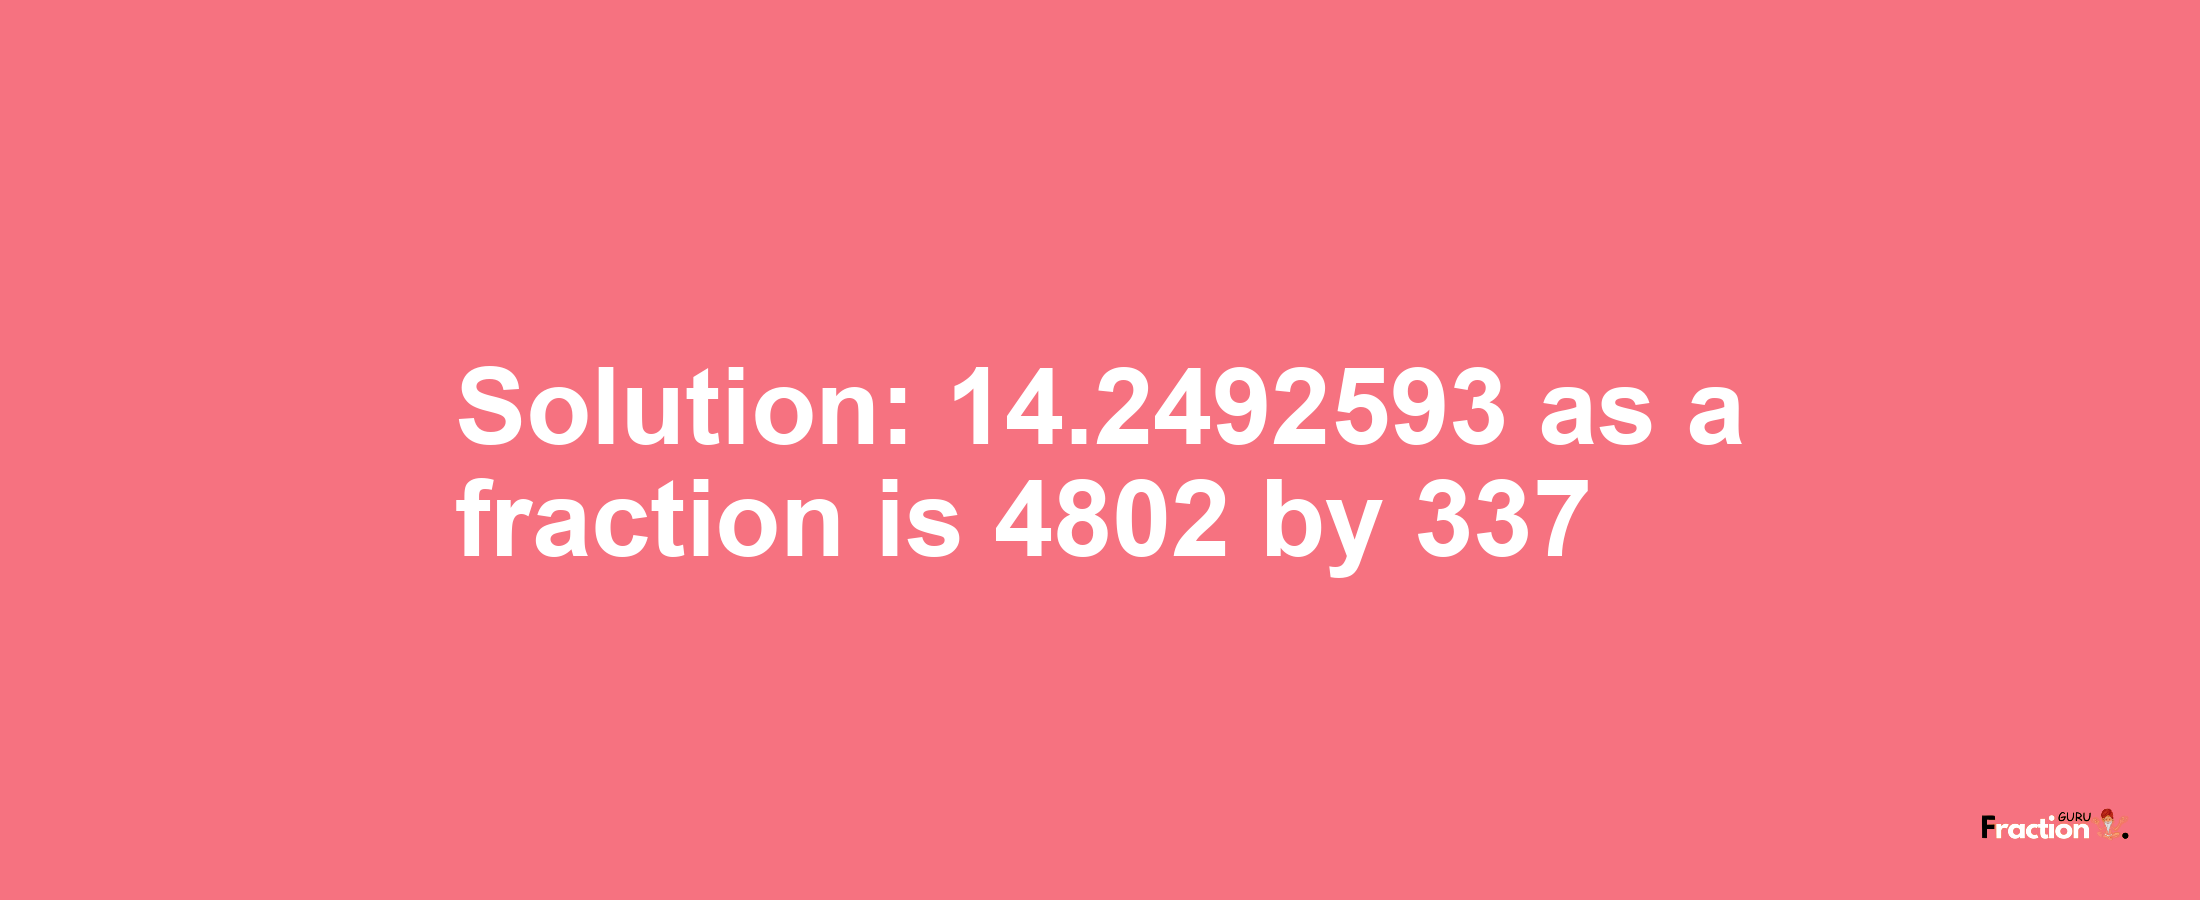 Solution:14.2492593 as a fraction is 4802/337